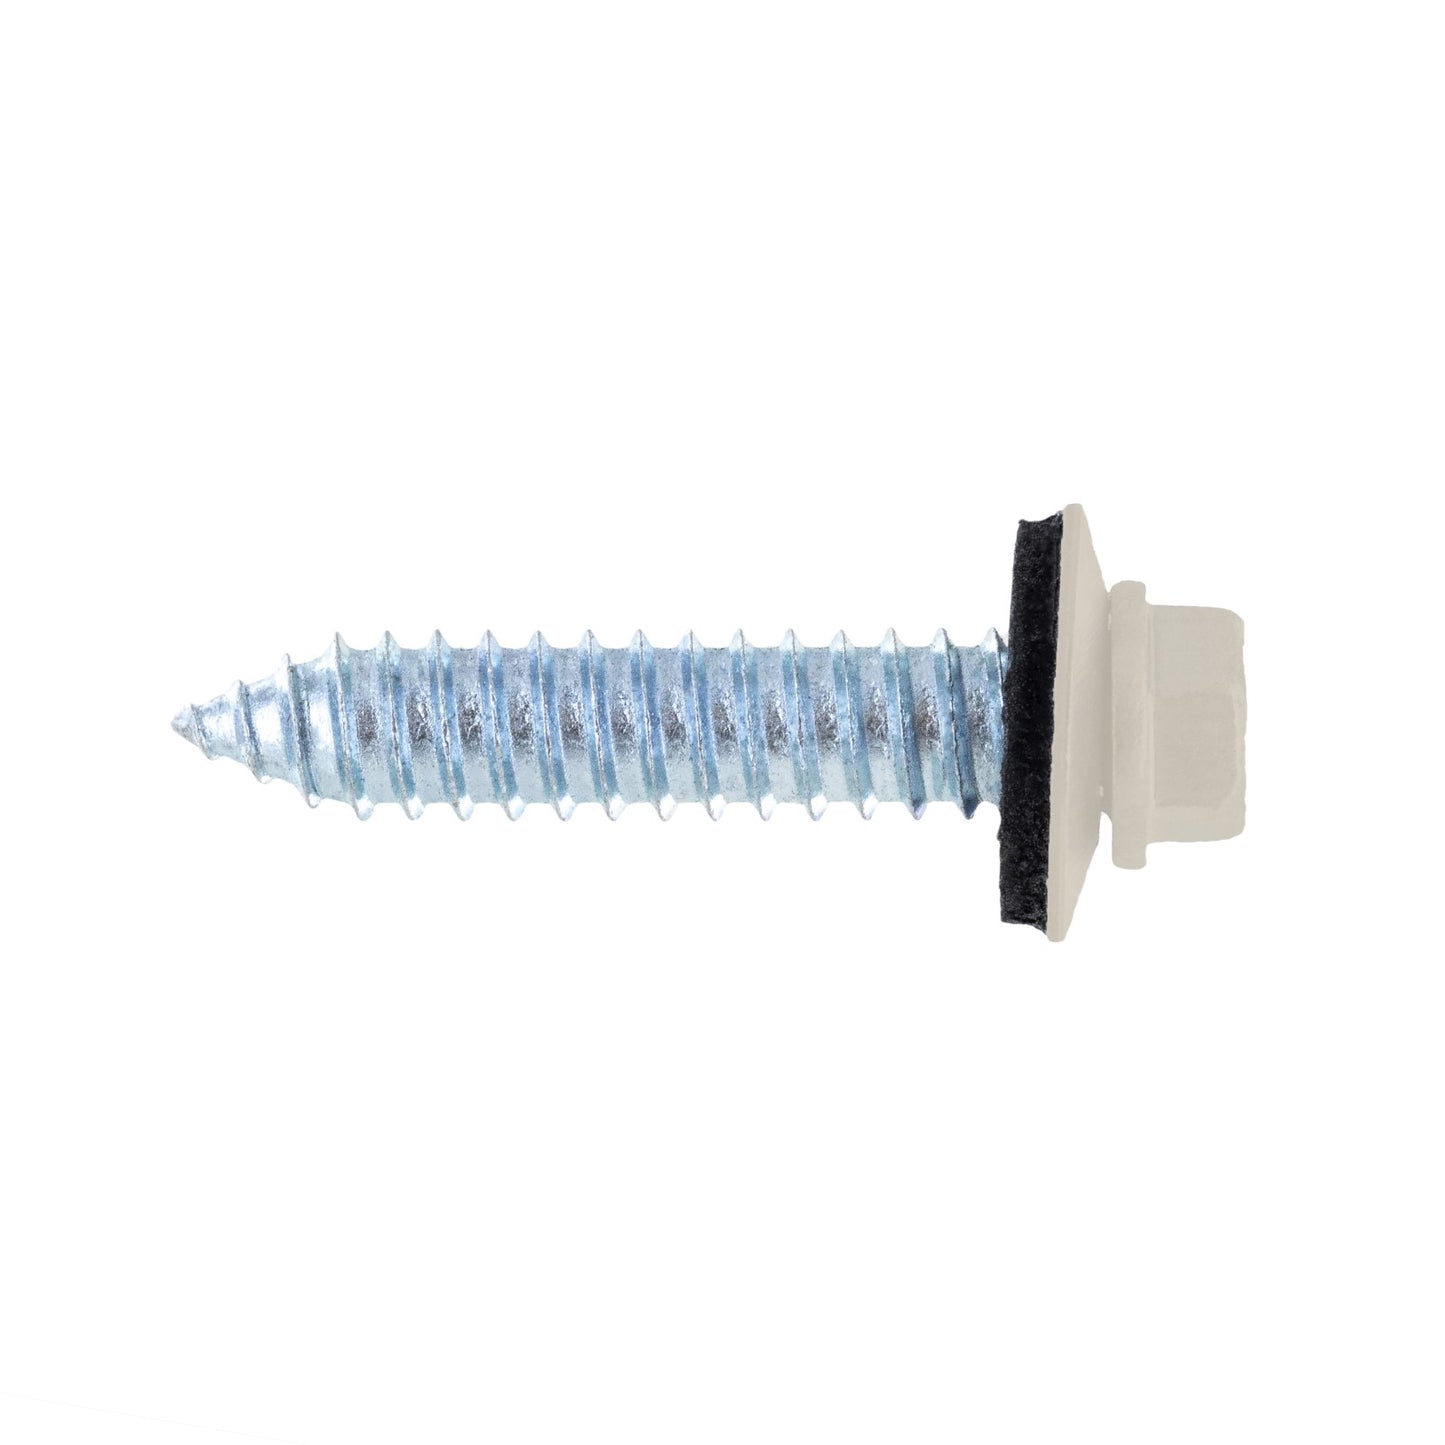 #17 x 1-1/4" Tapping Steelbinder Metal Roofing Screw - Light Stone - Pkg 250